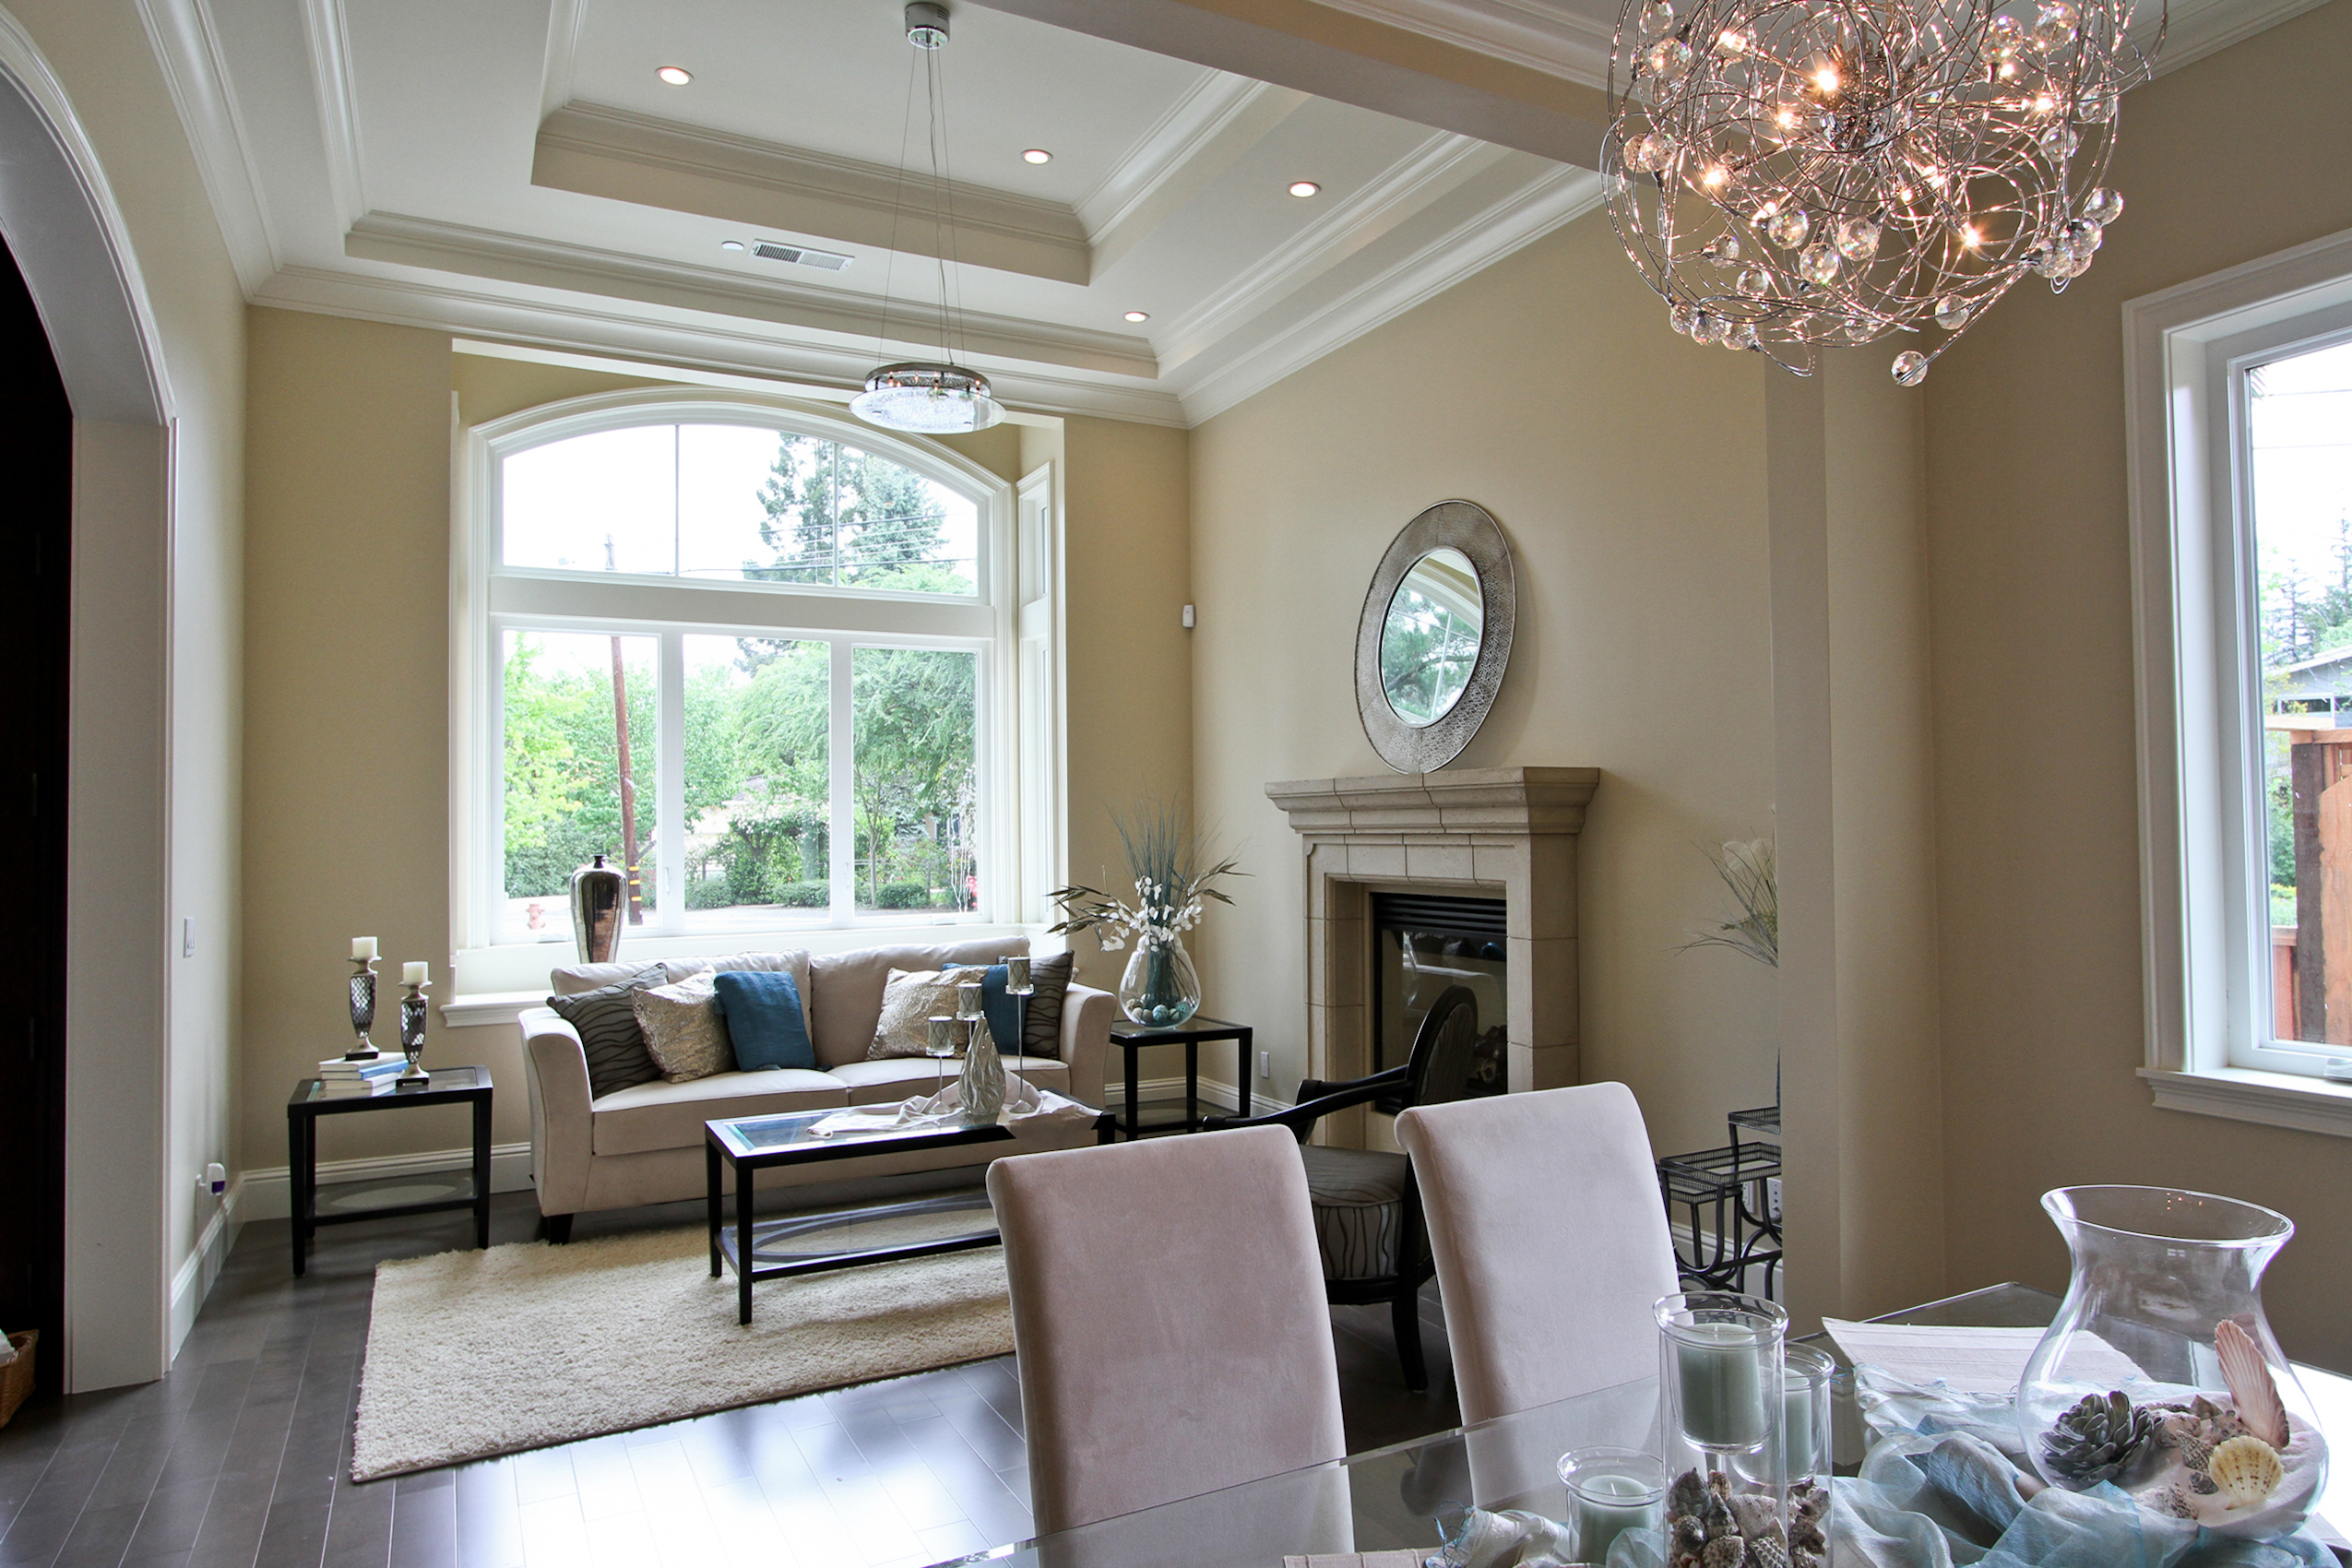 Interiors of custom home built in sunnyvale, palo alto, los altos, cupertino, mountain view, and redwood city services areas